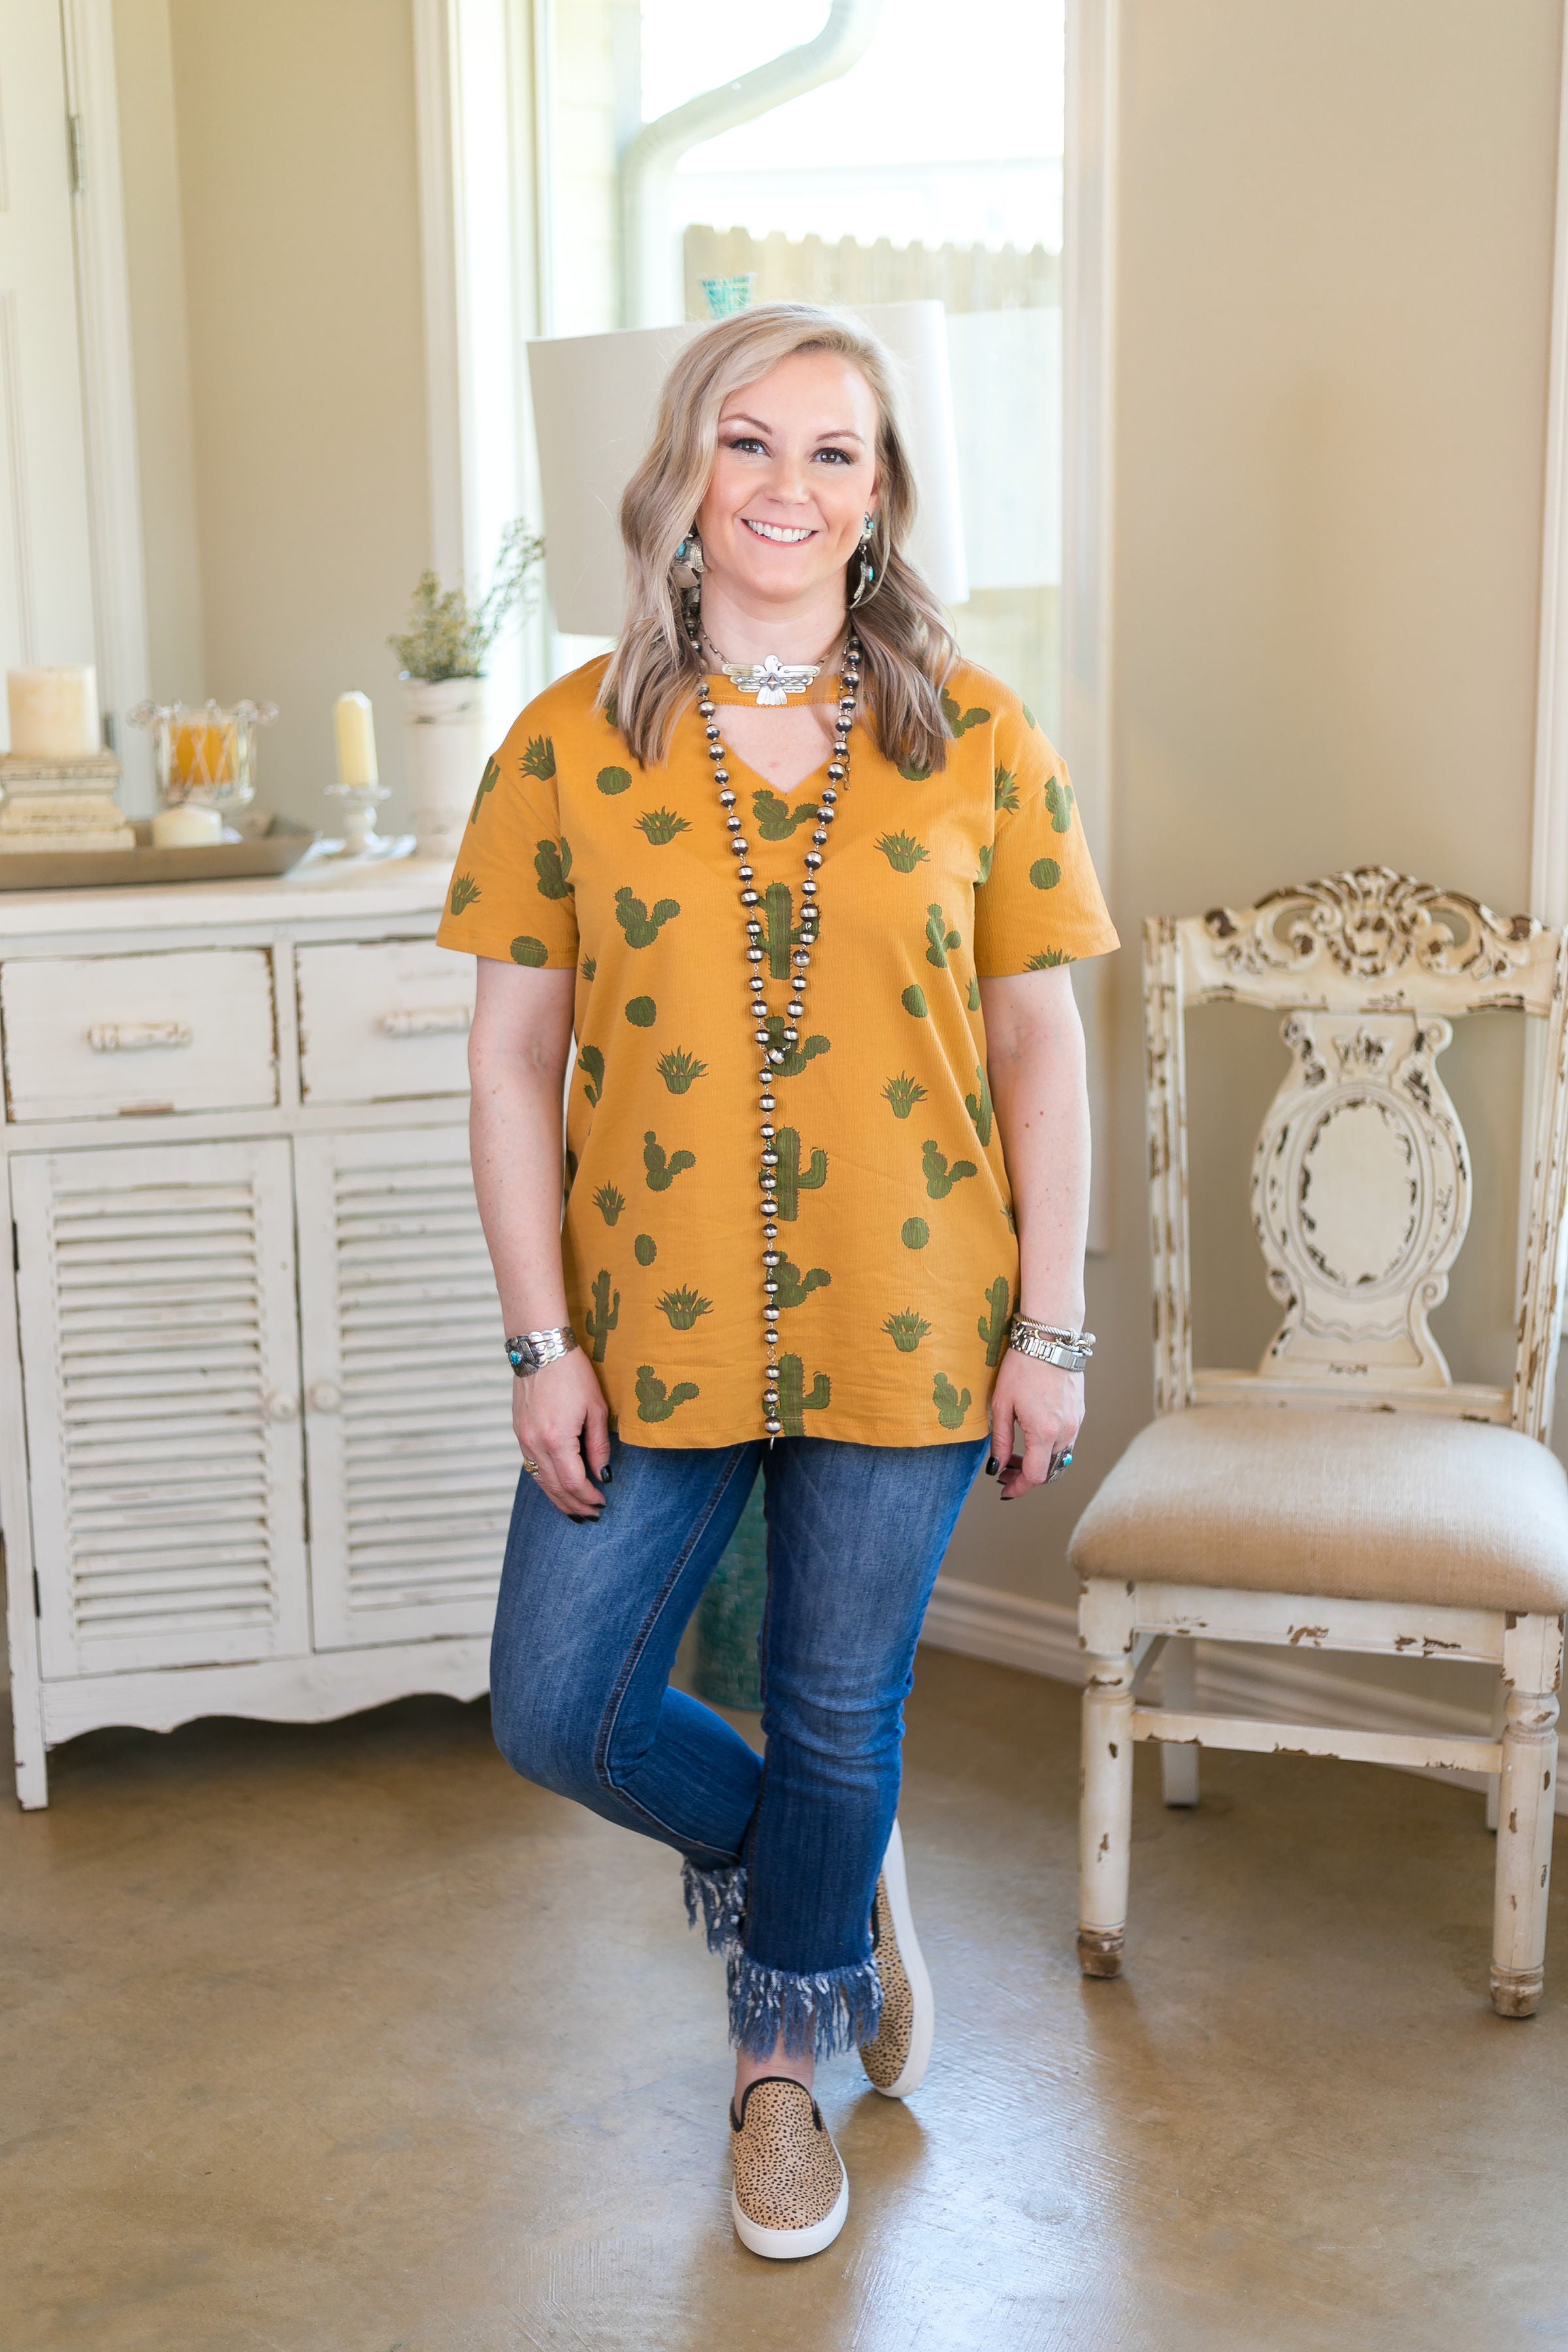 Last Chance Size Small | Way Out West Cactus Keyhole Cutout Short Sleeve Tee in Mustard Yellow - Giddy Up Glamour Boutique